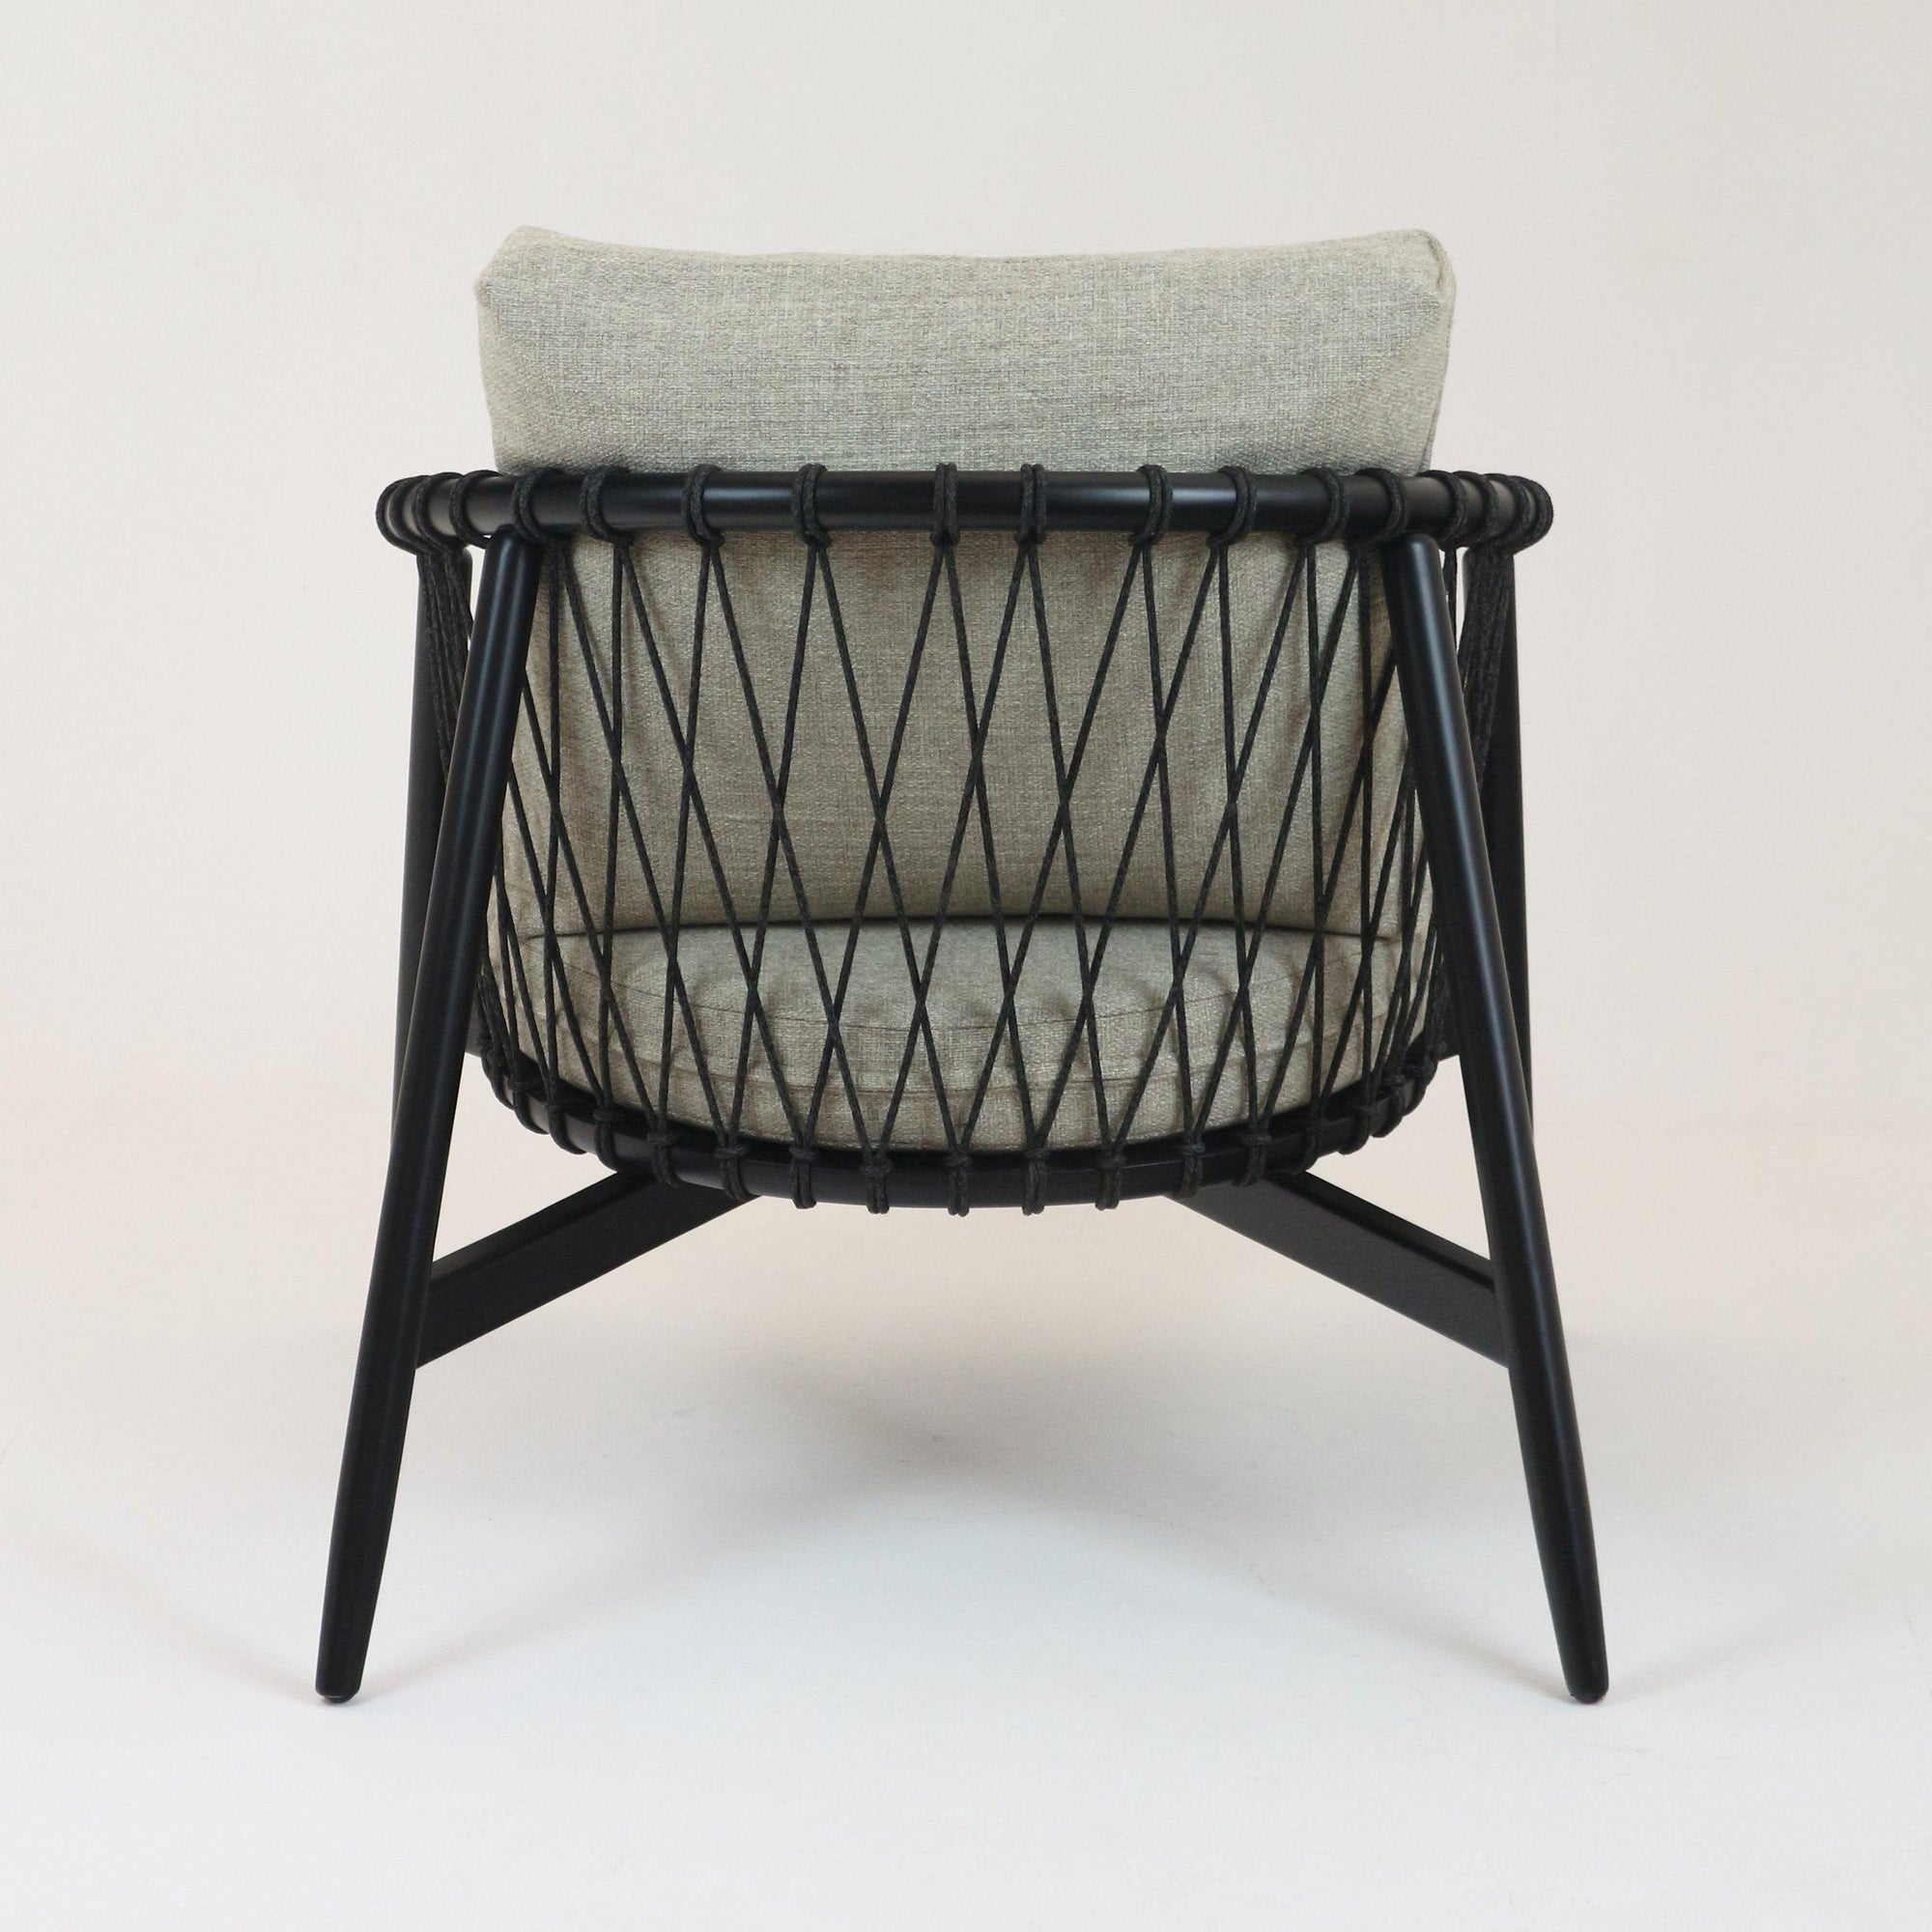 Mevcali Accent Chair with Alpaca Boucle Upholstery - INTERIORTONIC